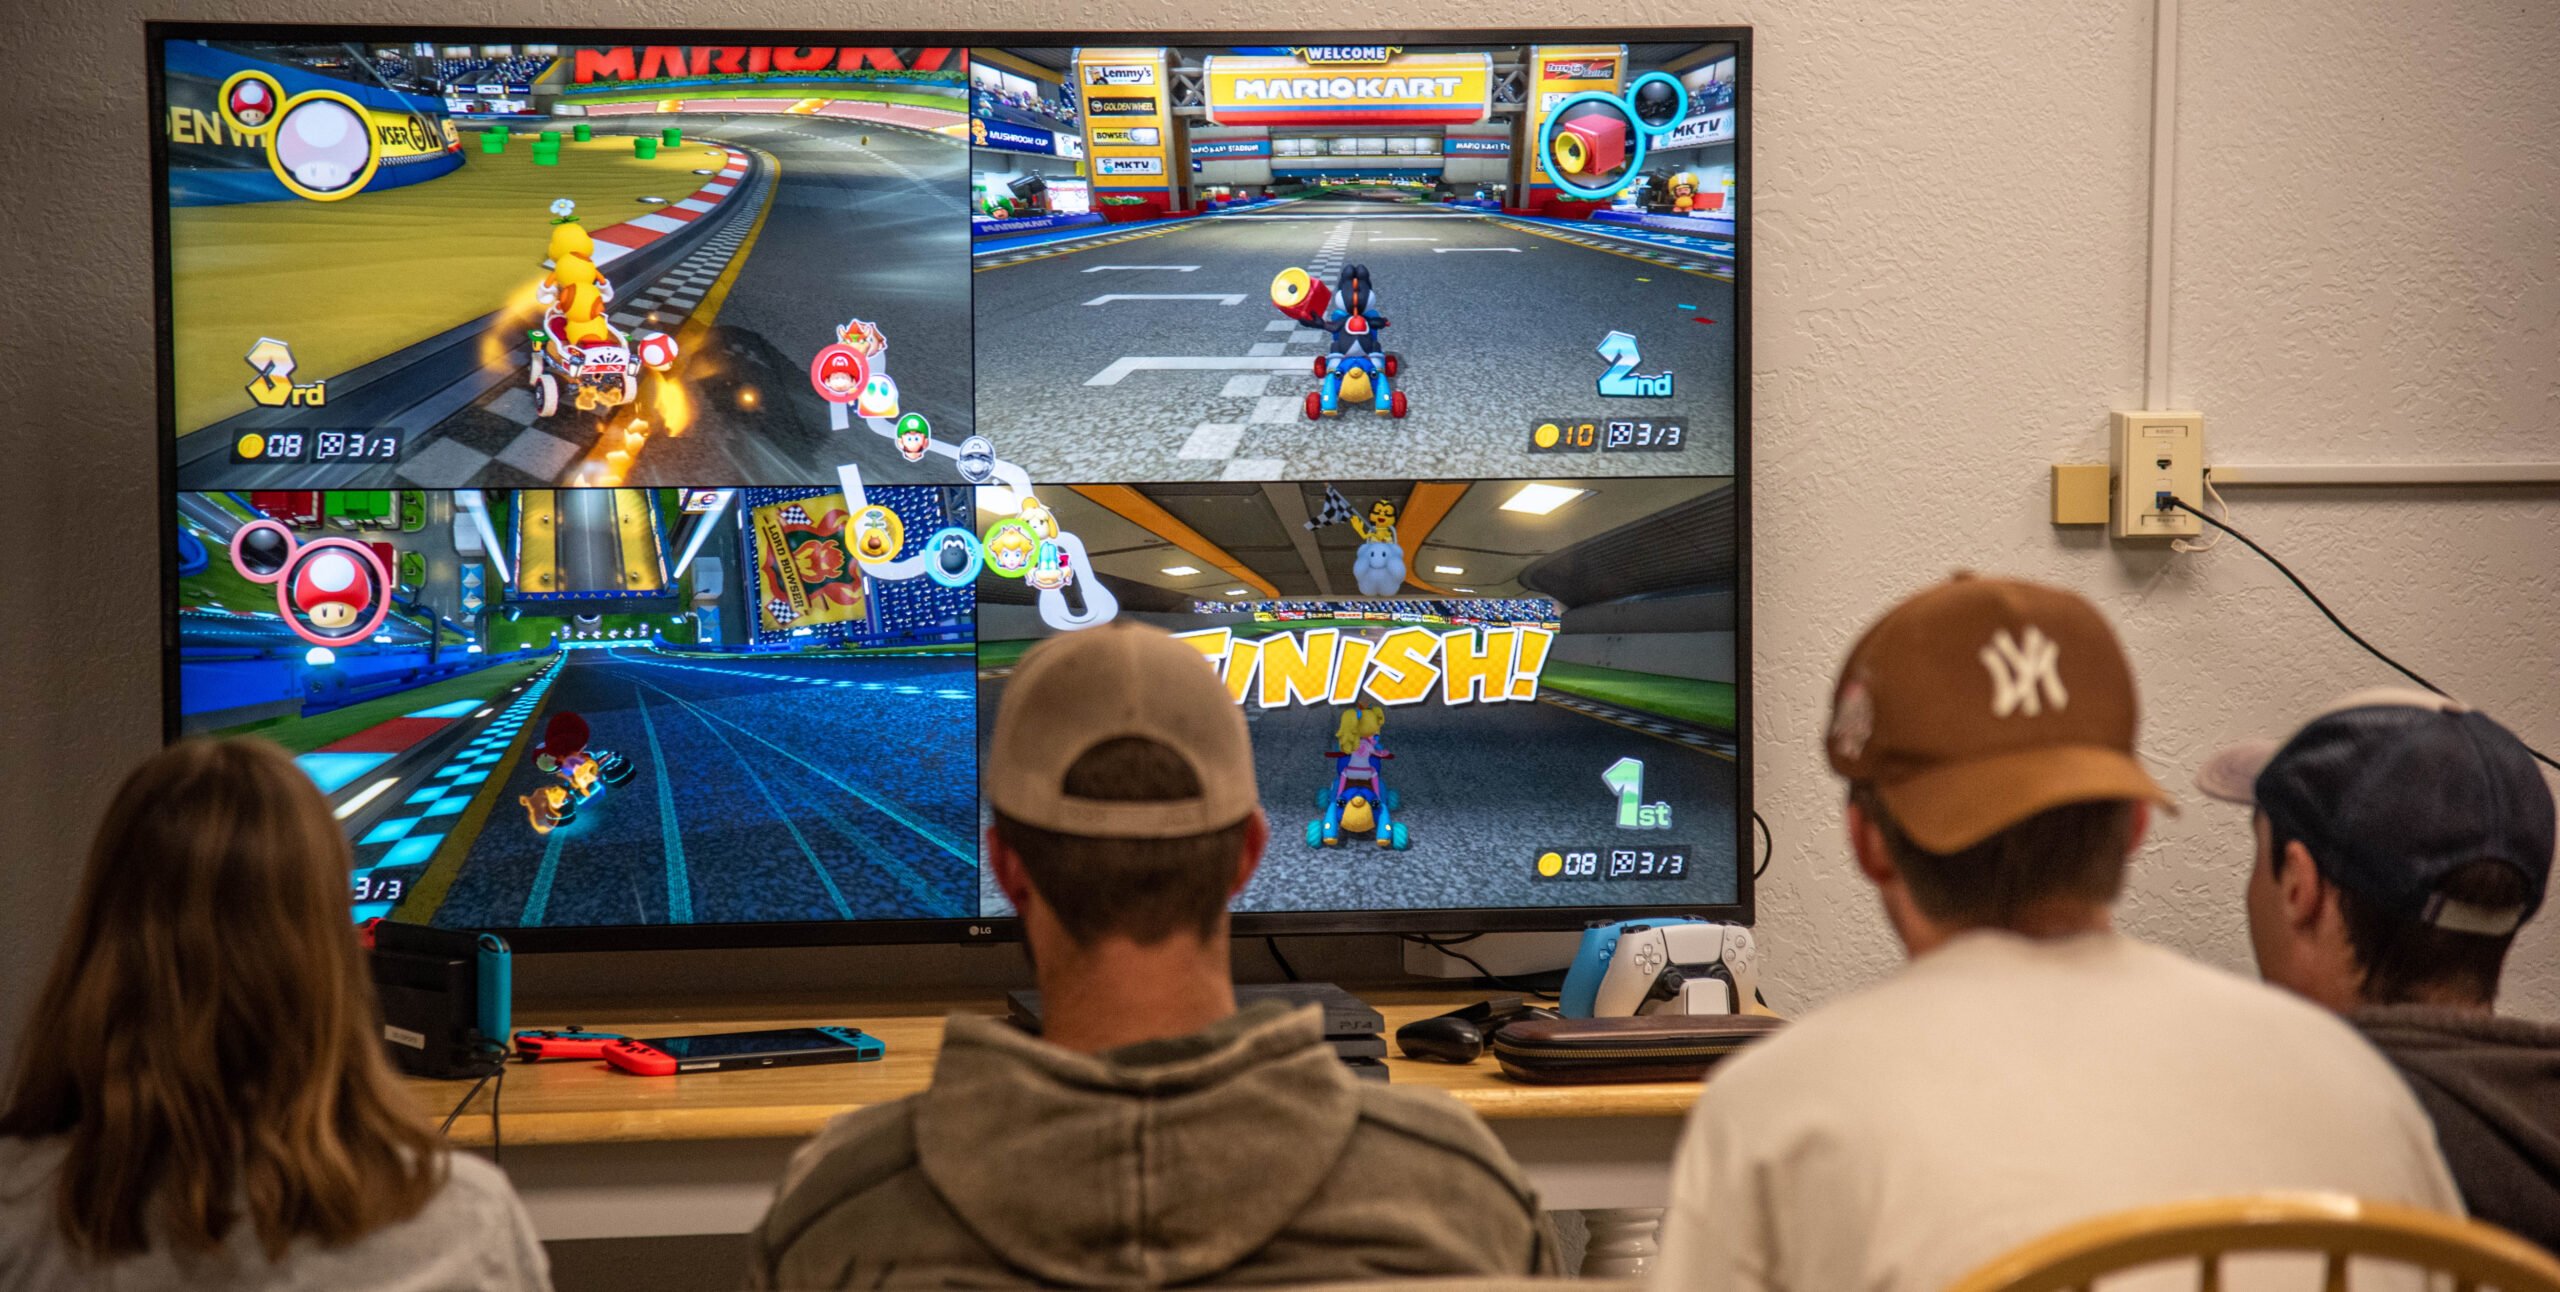 Mario Kart tournament this - Raymore Parks and Recreation